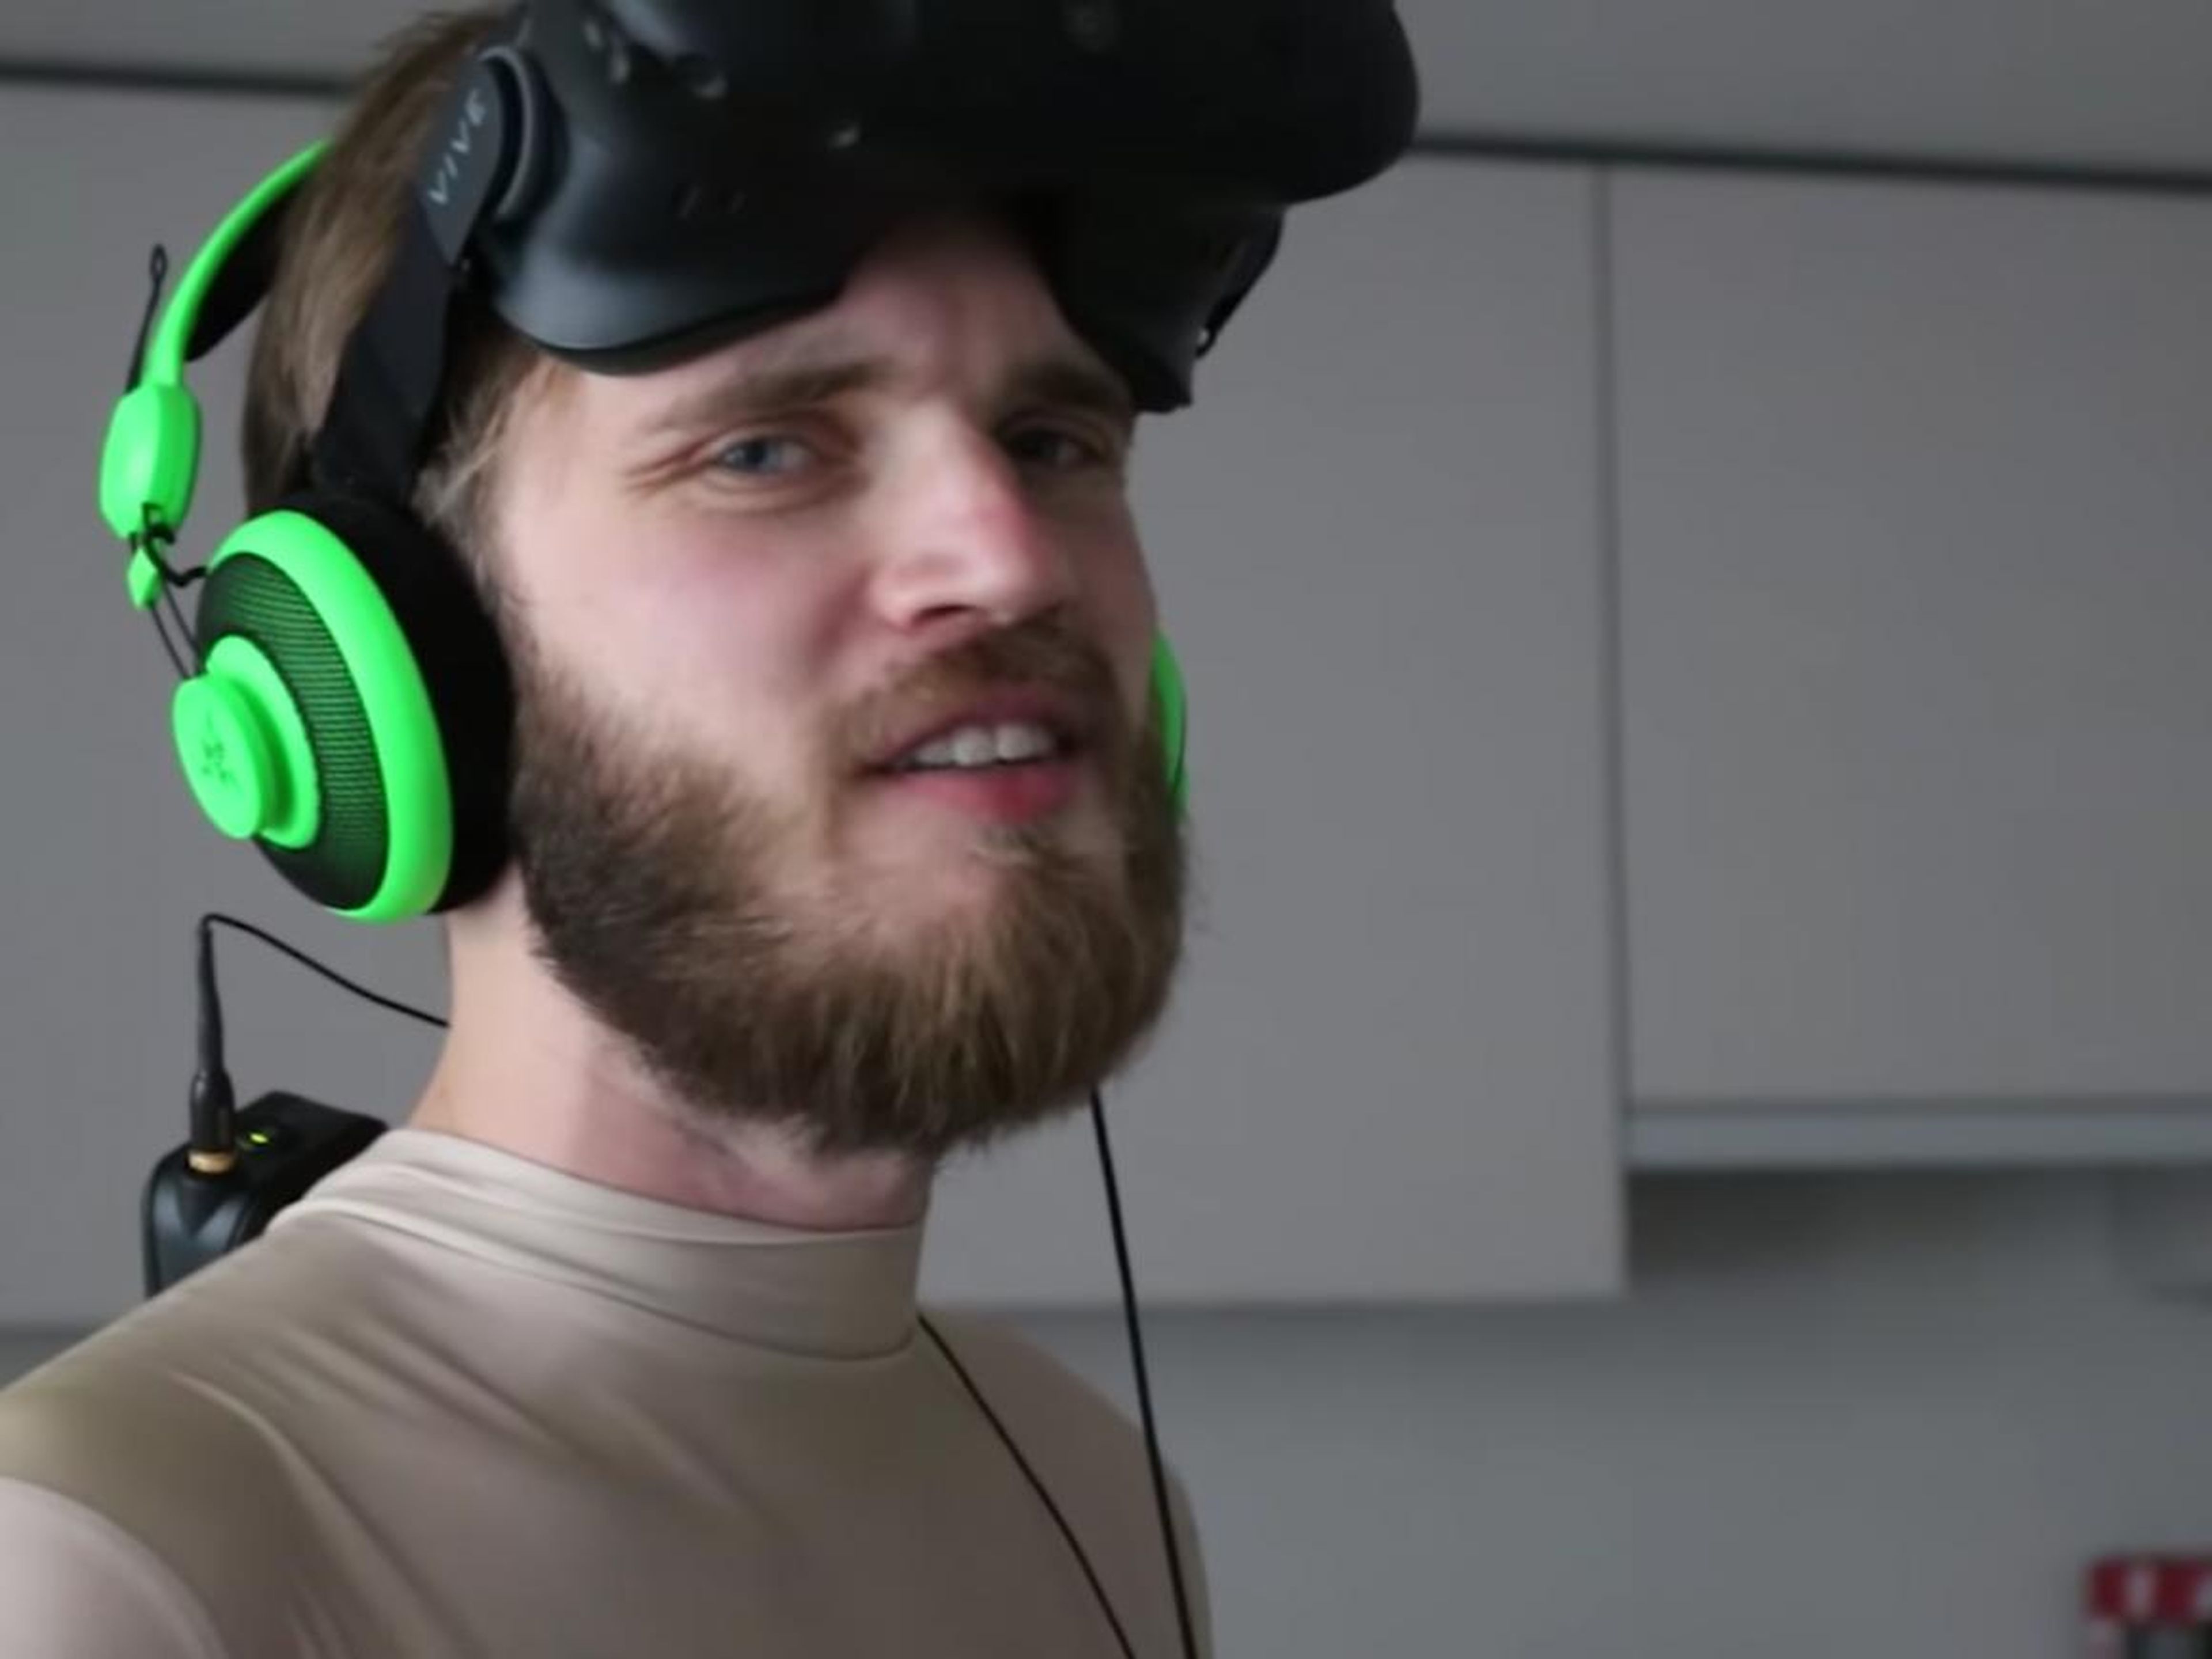 Kjellberg attempted to stave off T-Series' rapid growth thanks to a massive social-media campaign by PewDiePie's loyal fans. Hackers targeted the Wall Street Journal homepage, smart TV devices, and thousands of printers to